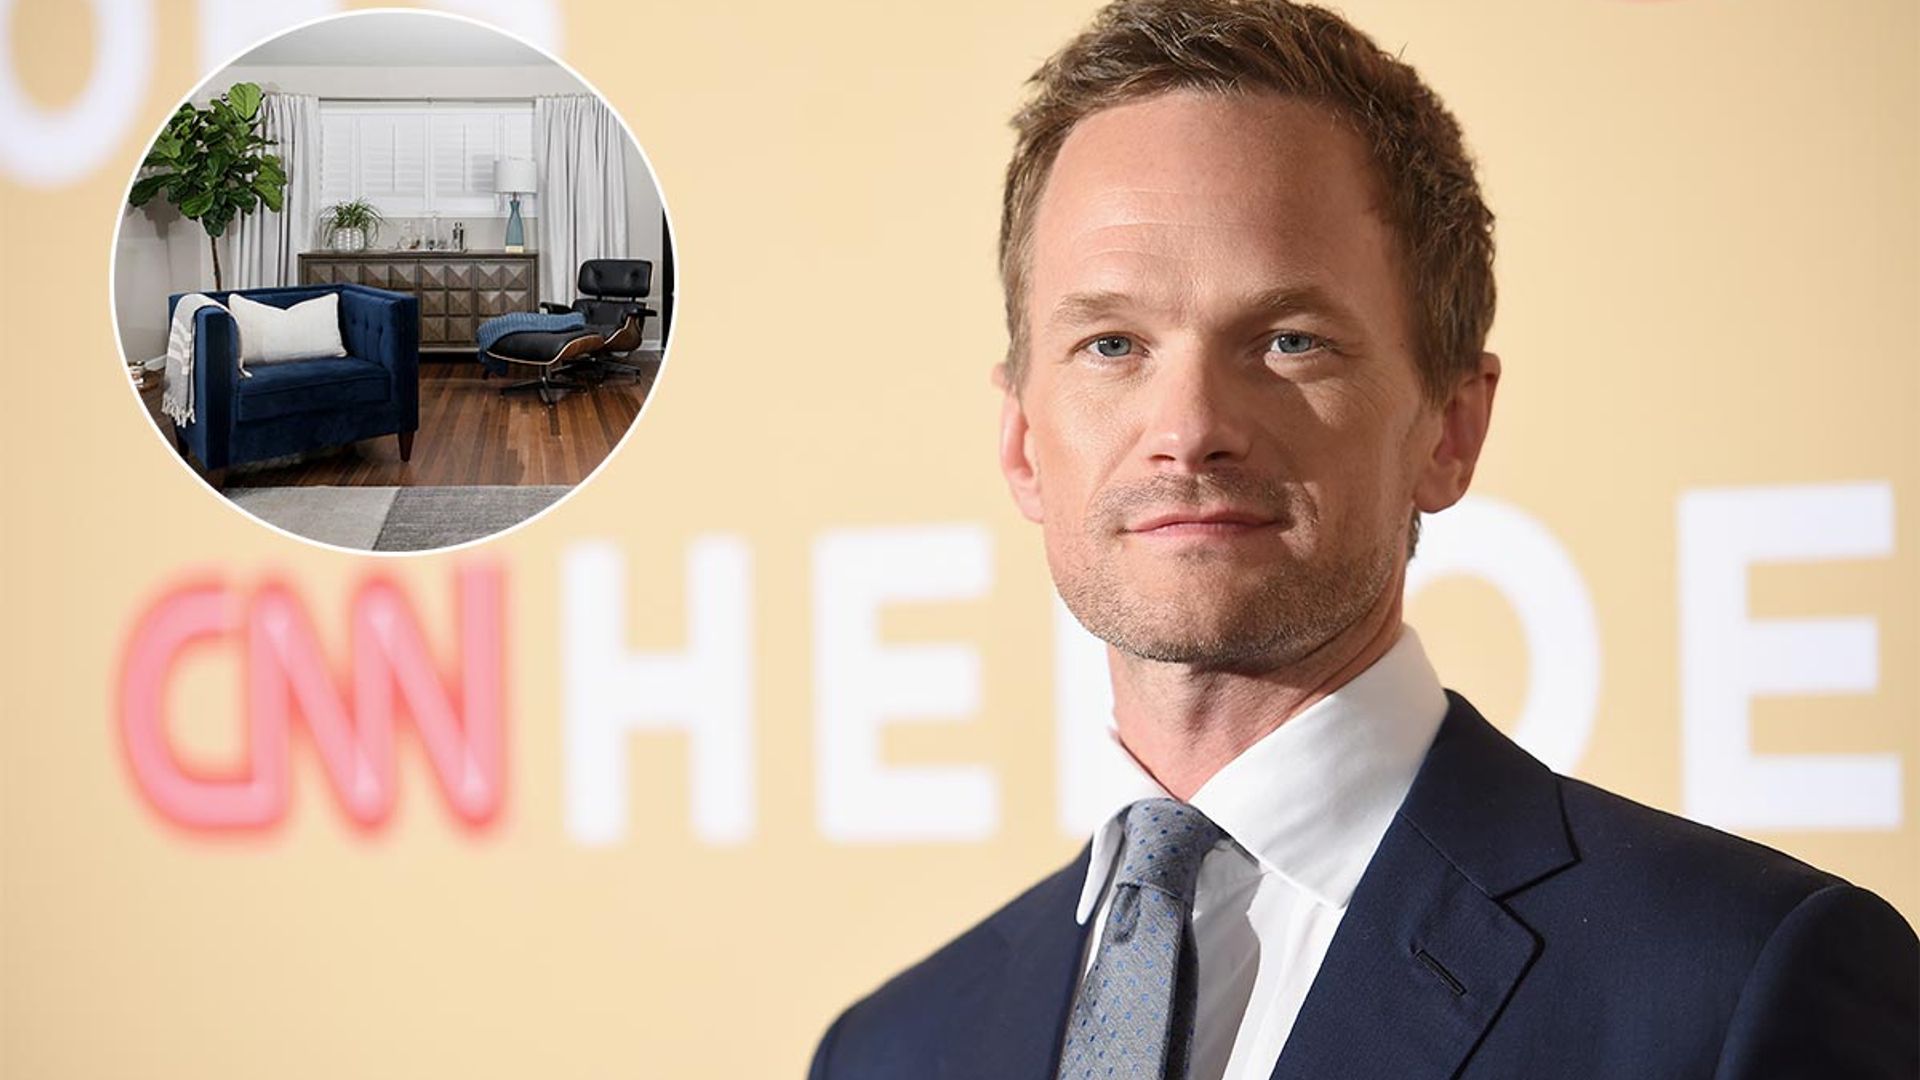 Neil Patrick Harris surprises his brother with an amazing home makeover – and you HAVE to see it